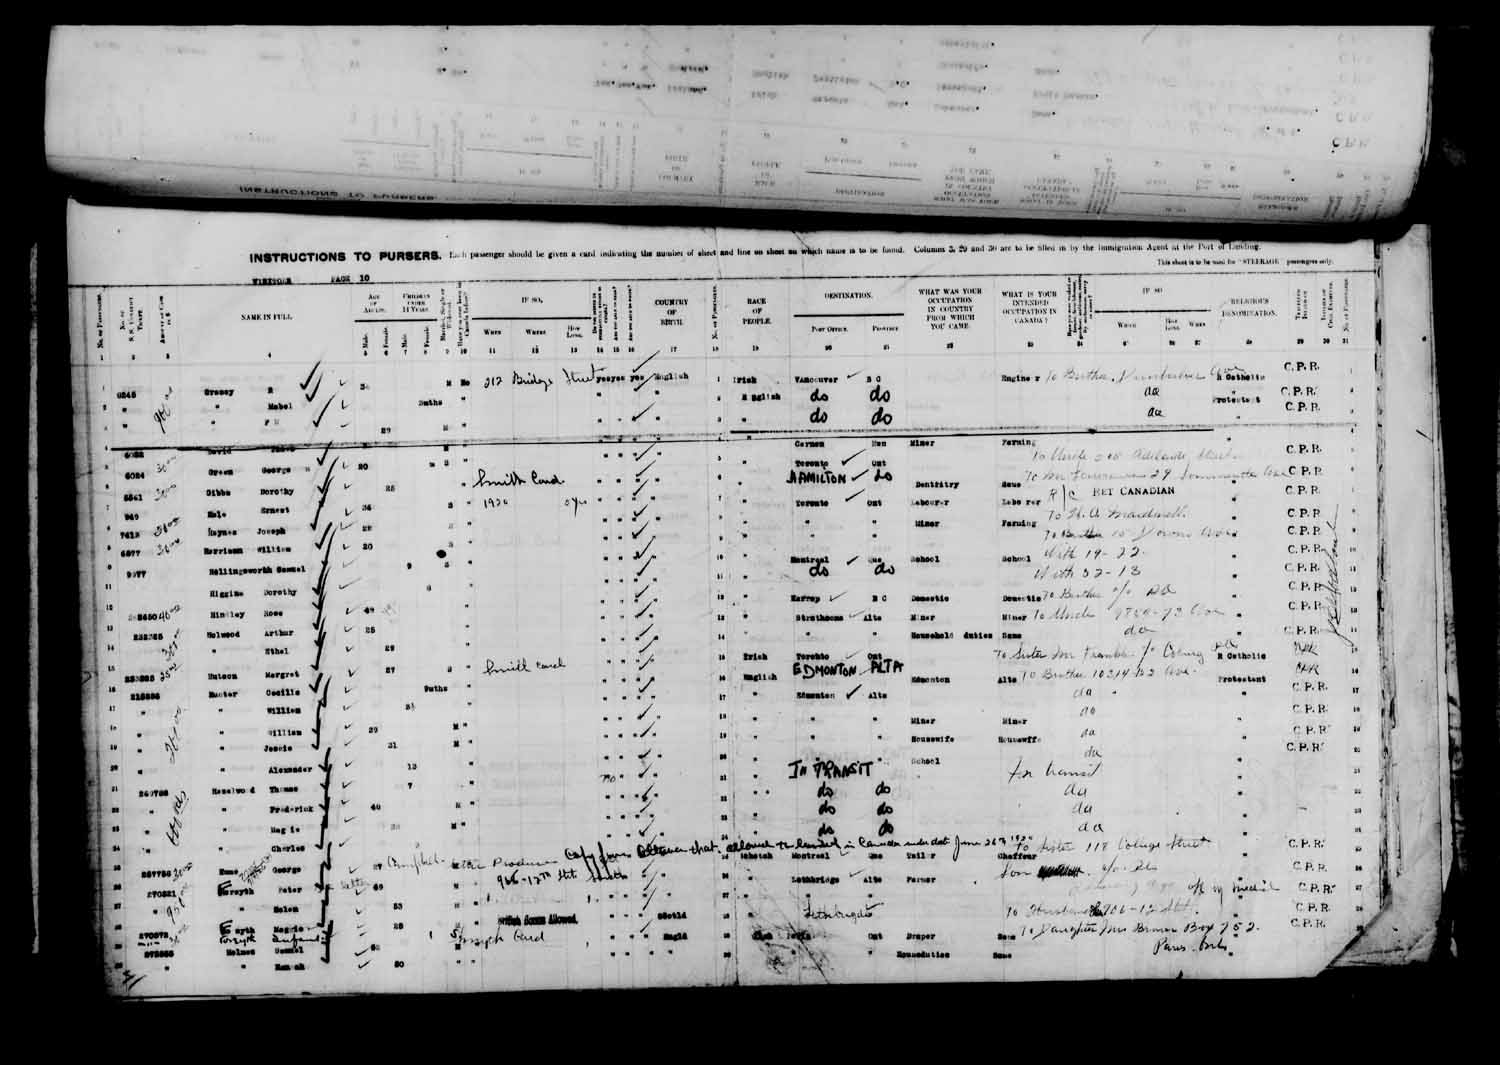 Digitized page of Passenger Lists for Image No.: e003610650